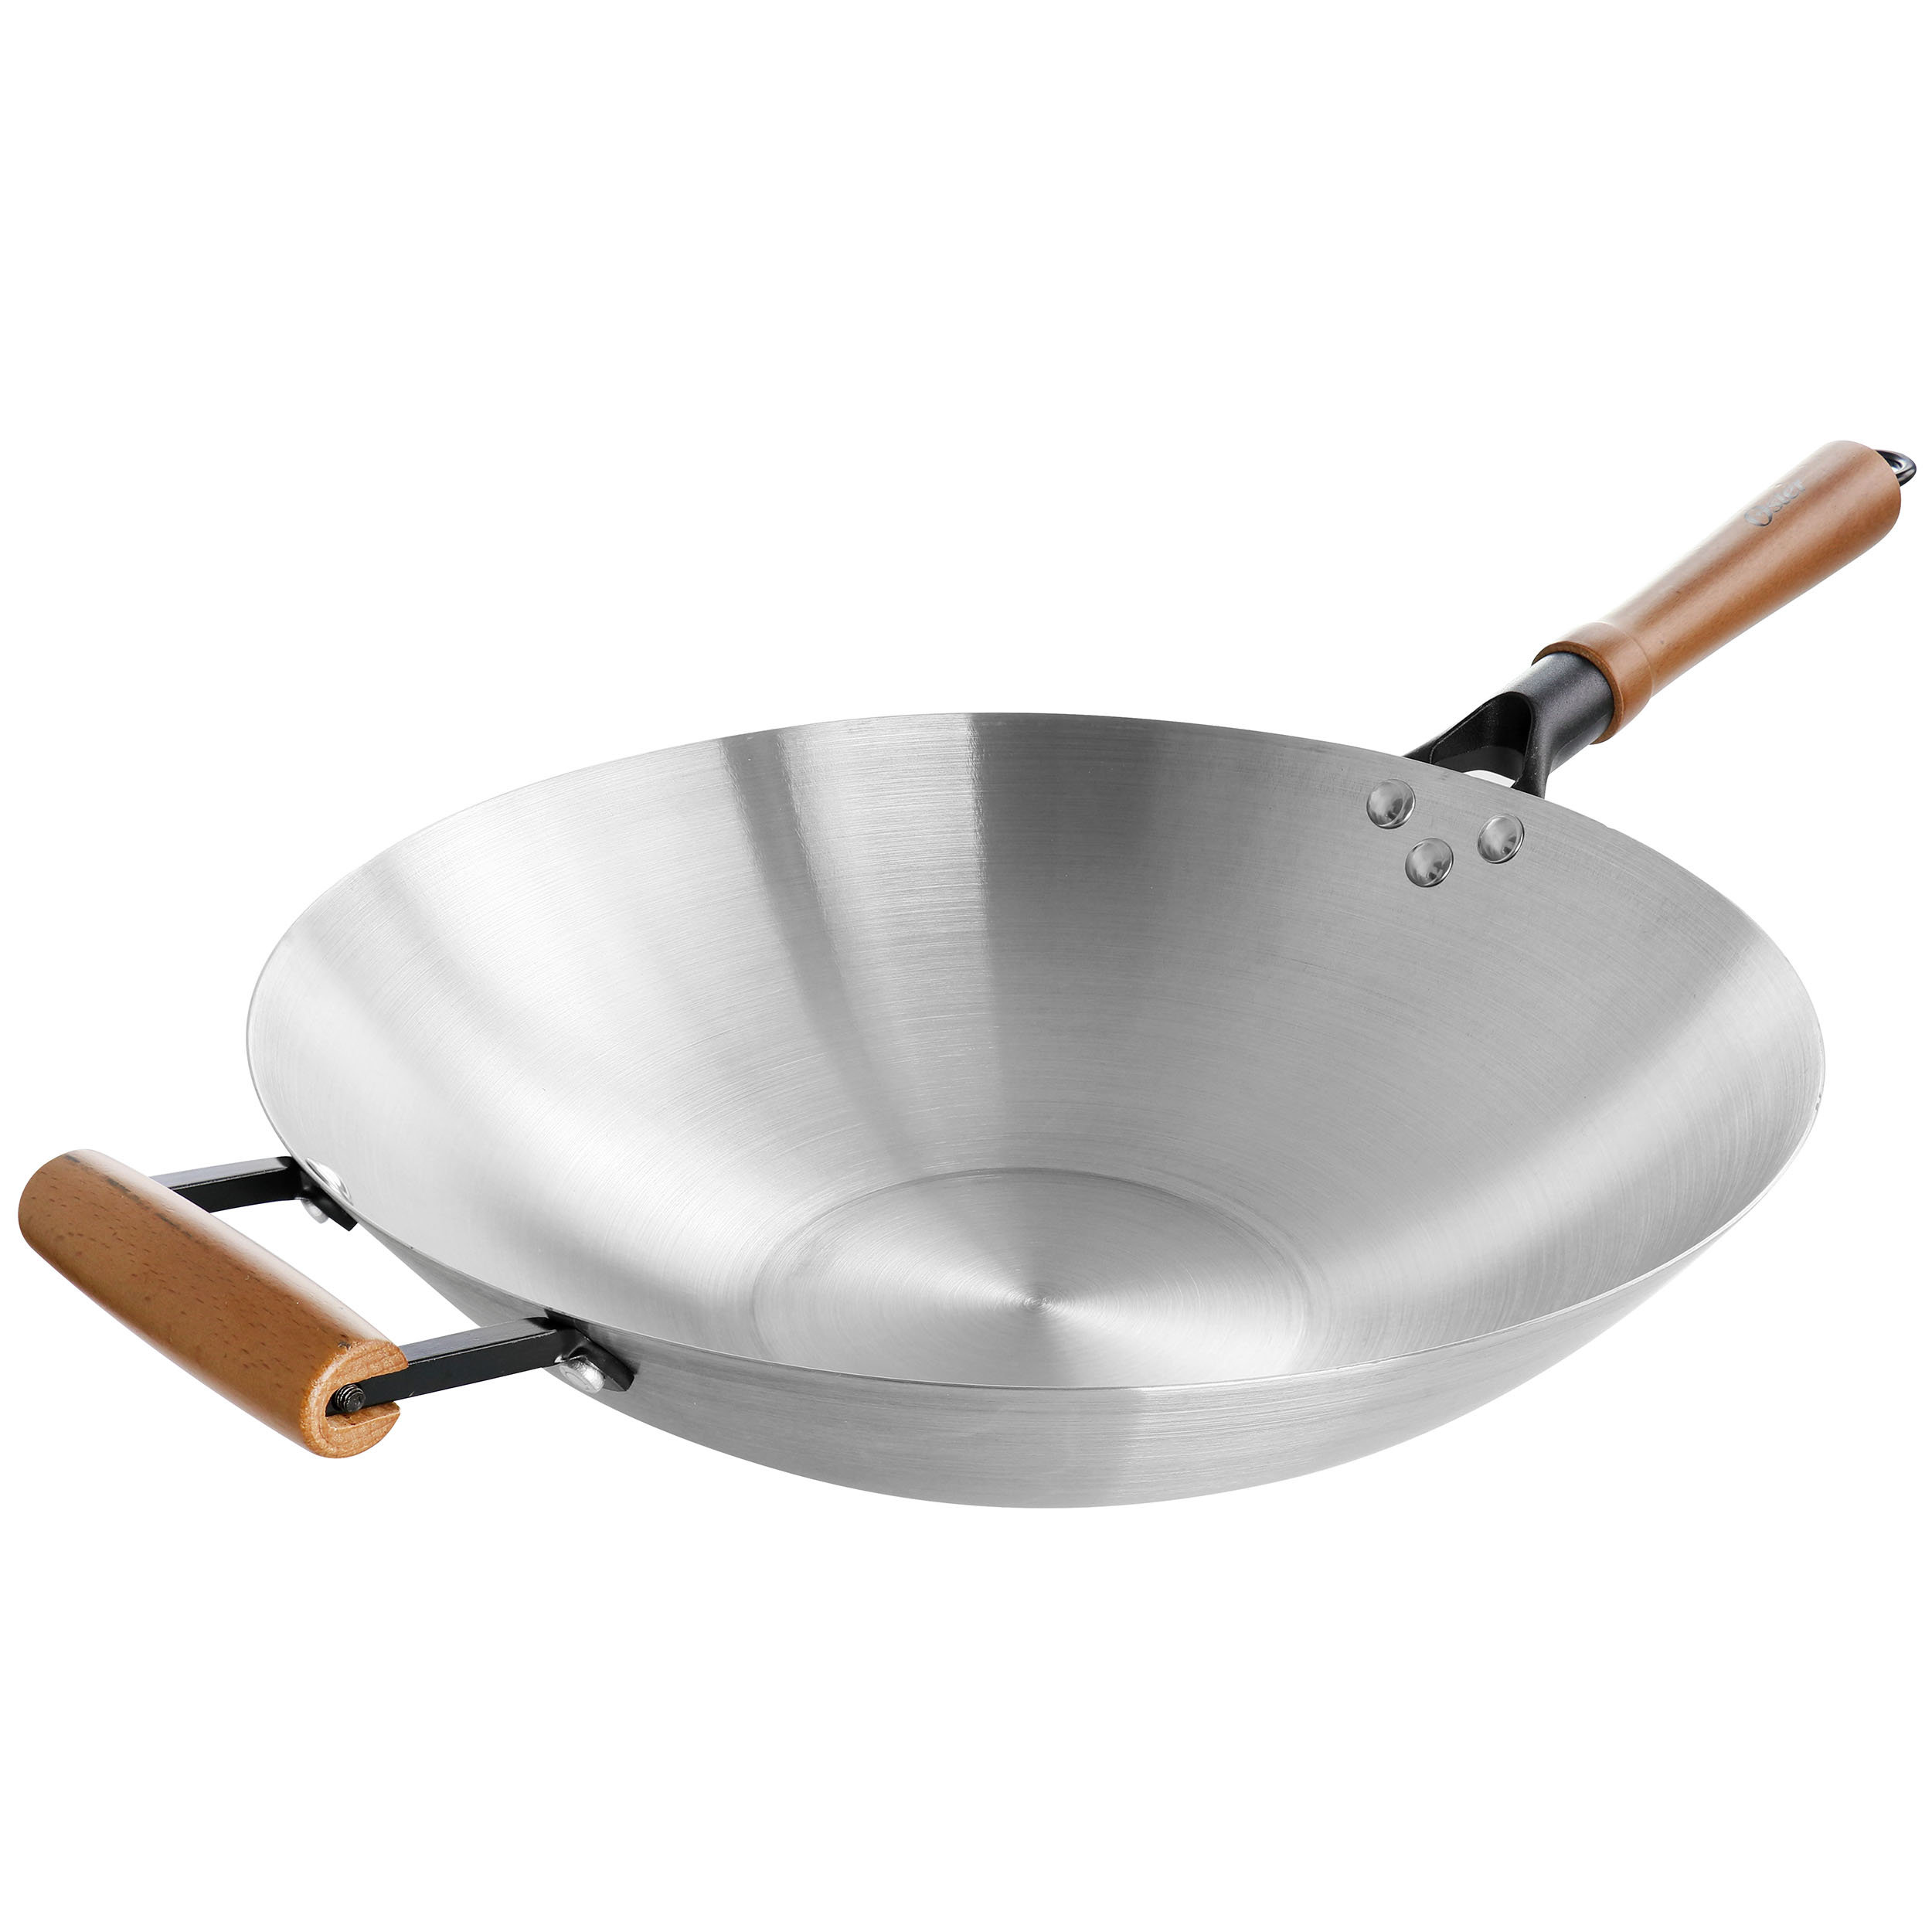 KitchenAid 5-Ply Clad 15-in Stainless Steel Wok